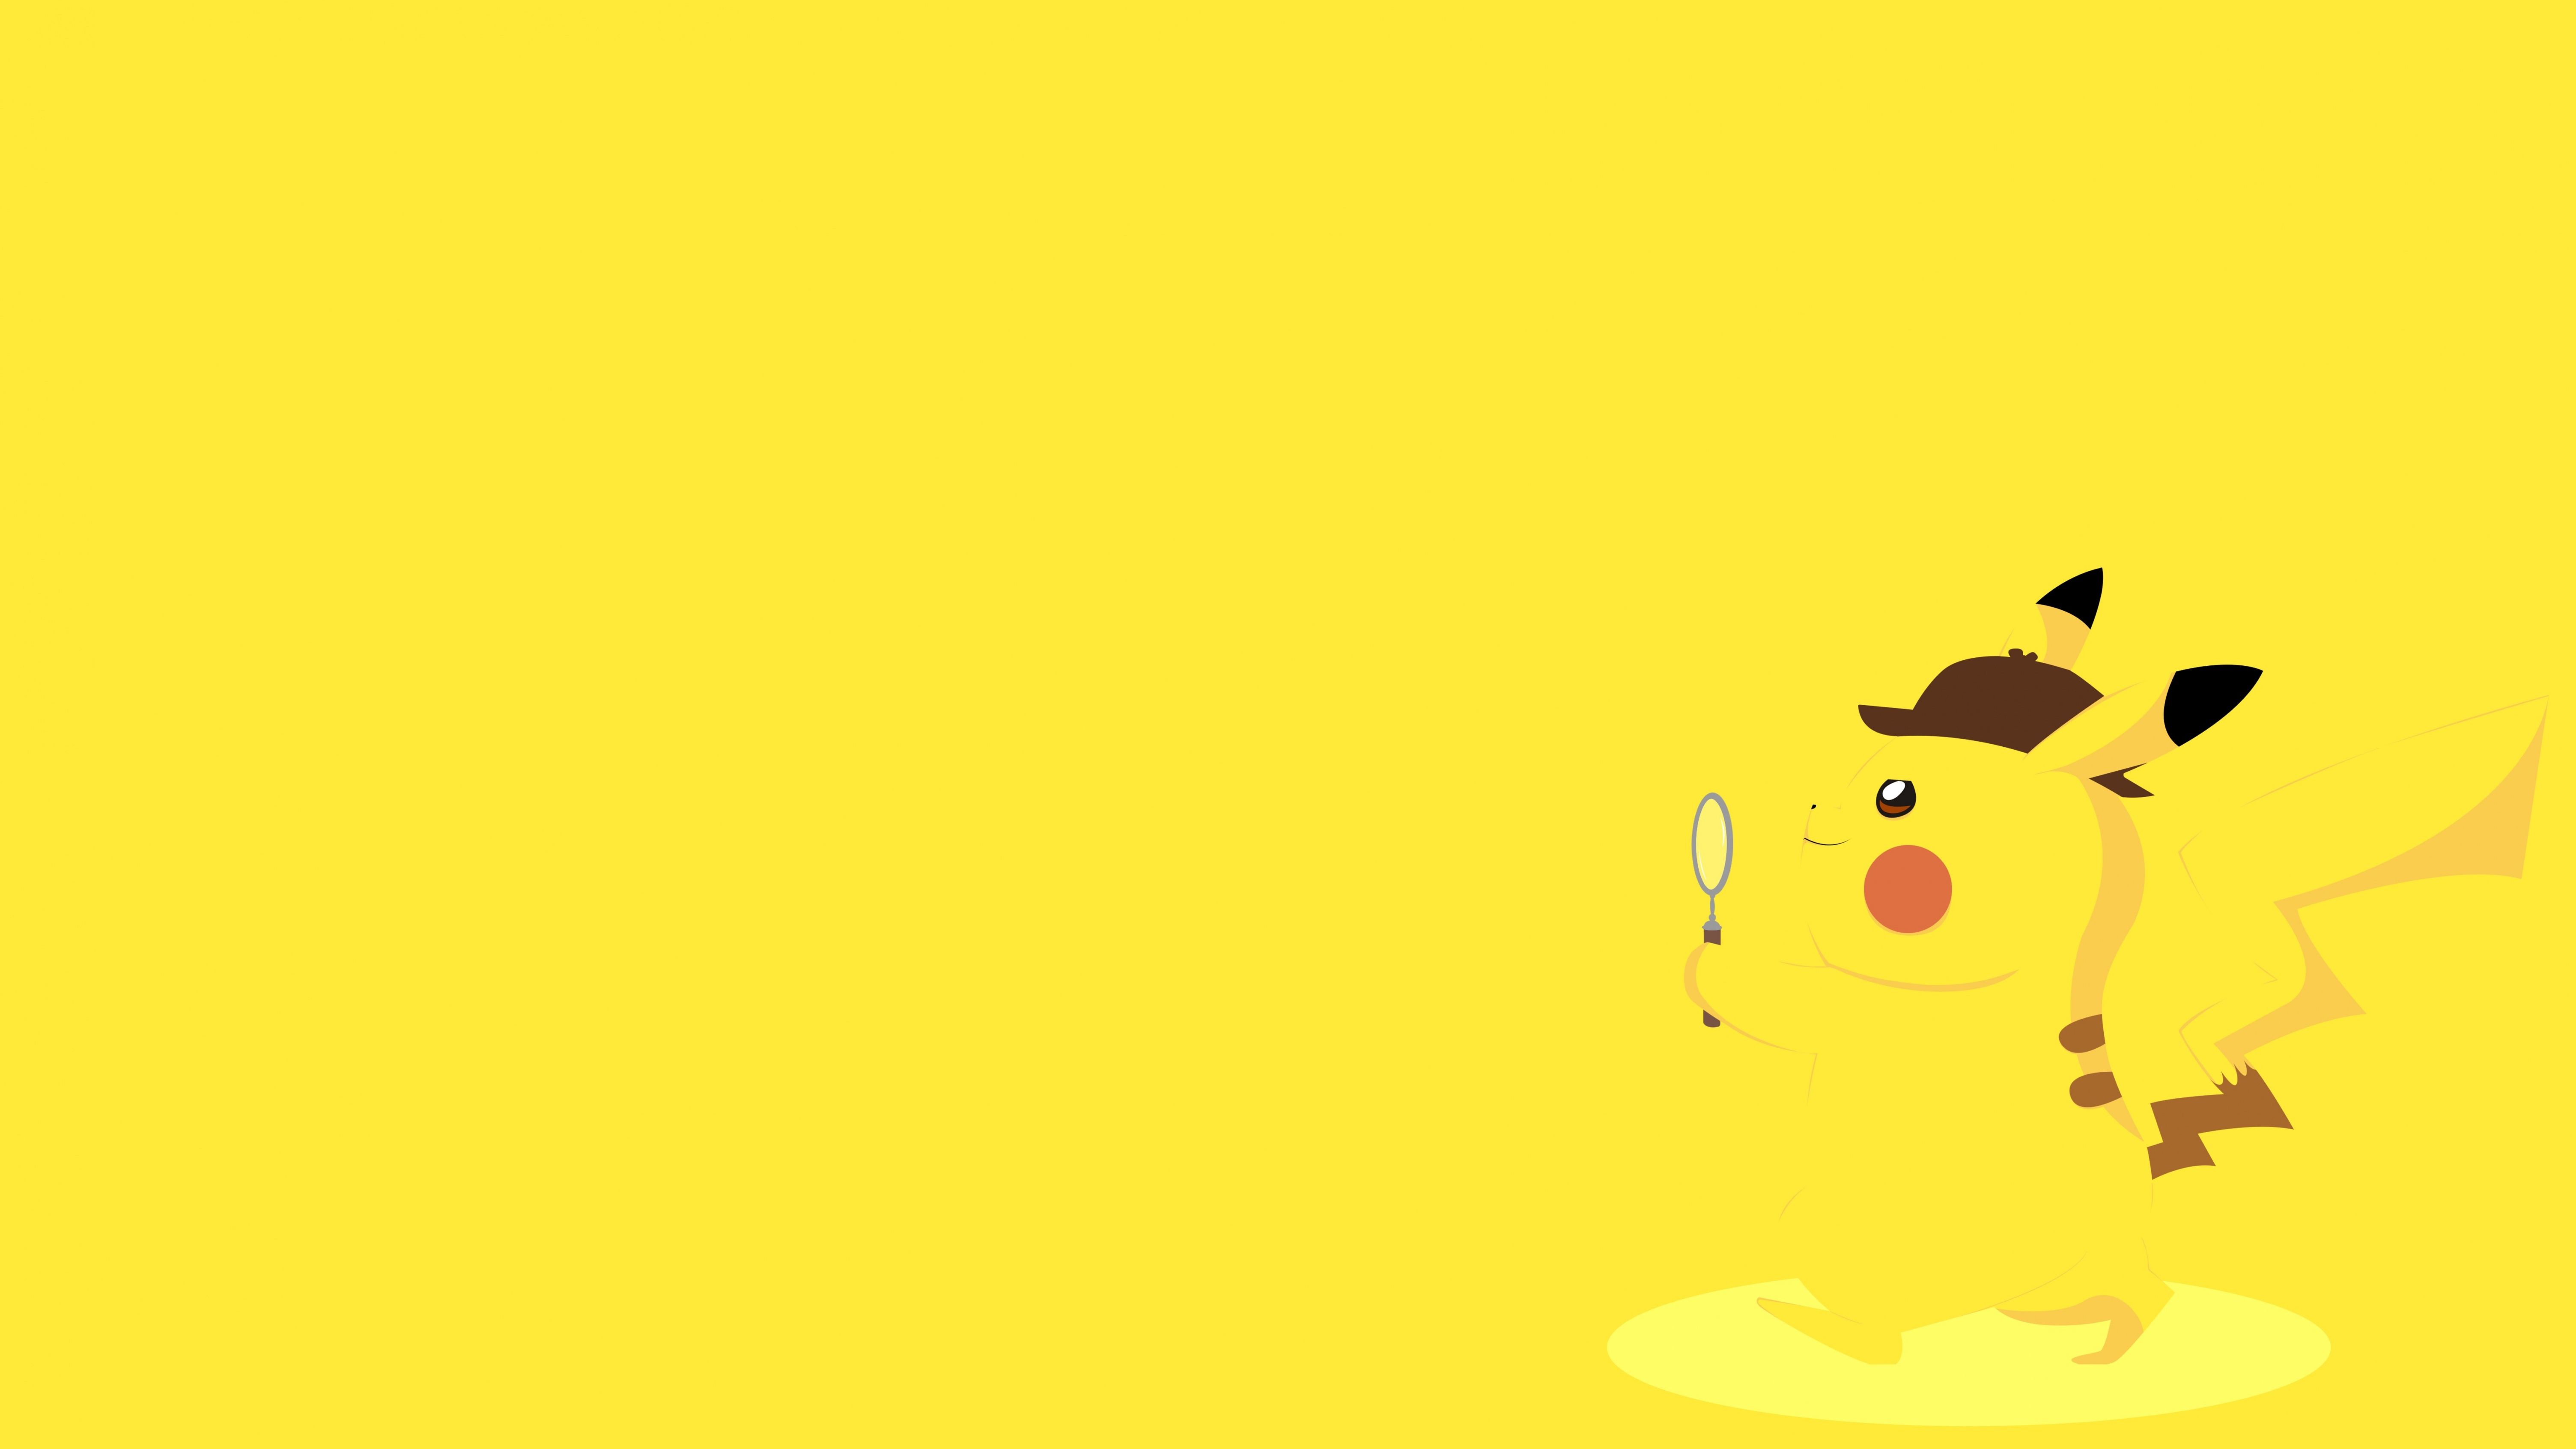 A yellow background with the pokemon character - Pikachu